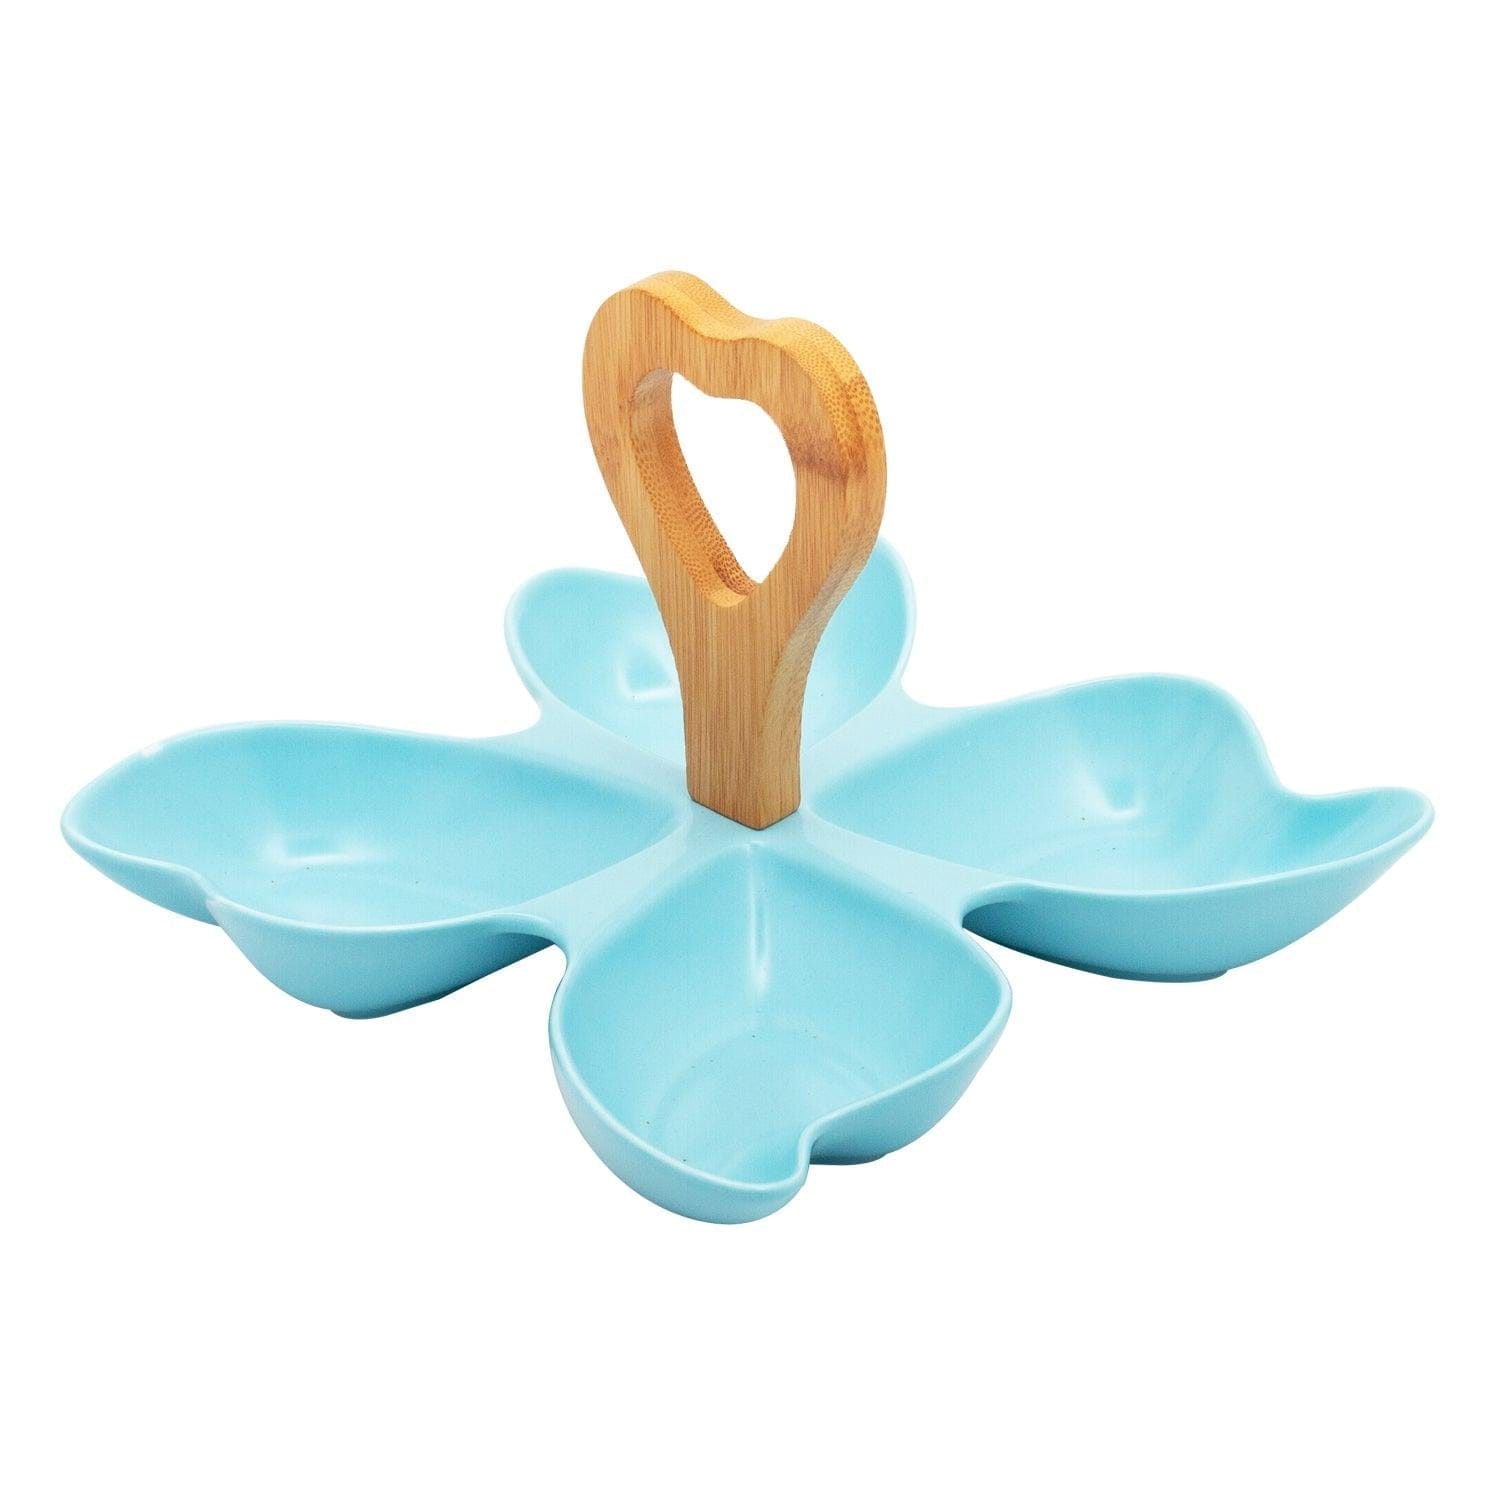 4 Compartment Leafy Blue Ceramic Serving Platter with Wooden Handle